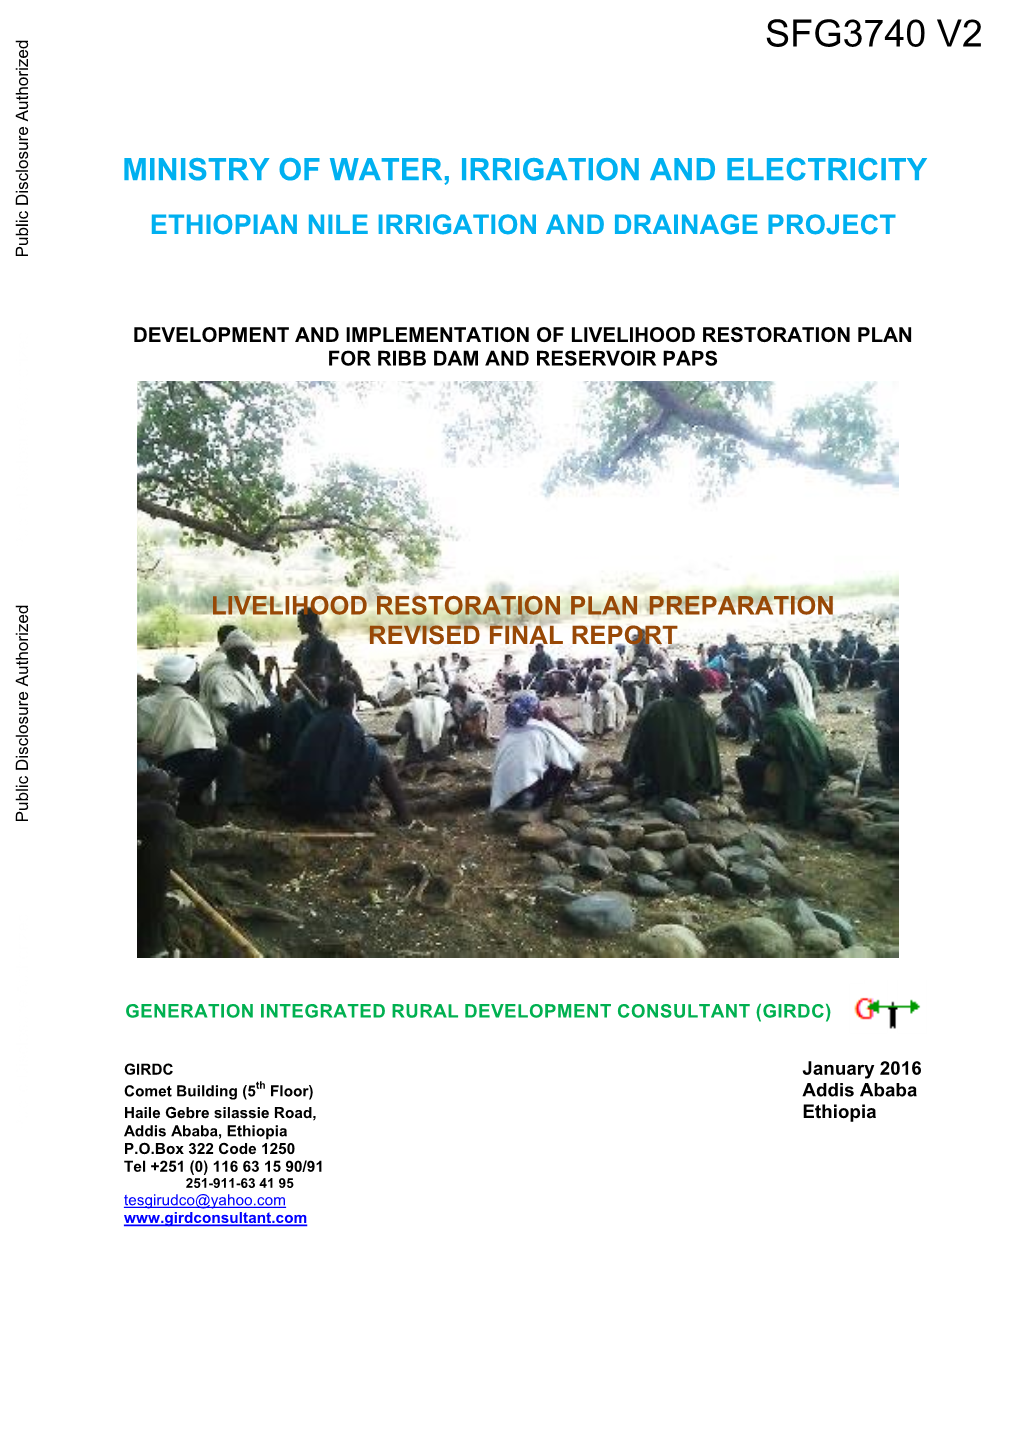 MINISTRY of WATER, IRRIGATION and ELECTRICITY ETHIOPIAN NILE IRRIGATION and DRAINAGE PROJECT Public Disclosure Authorized